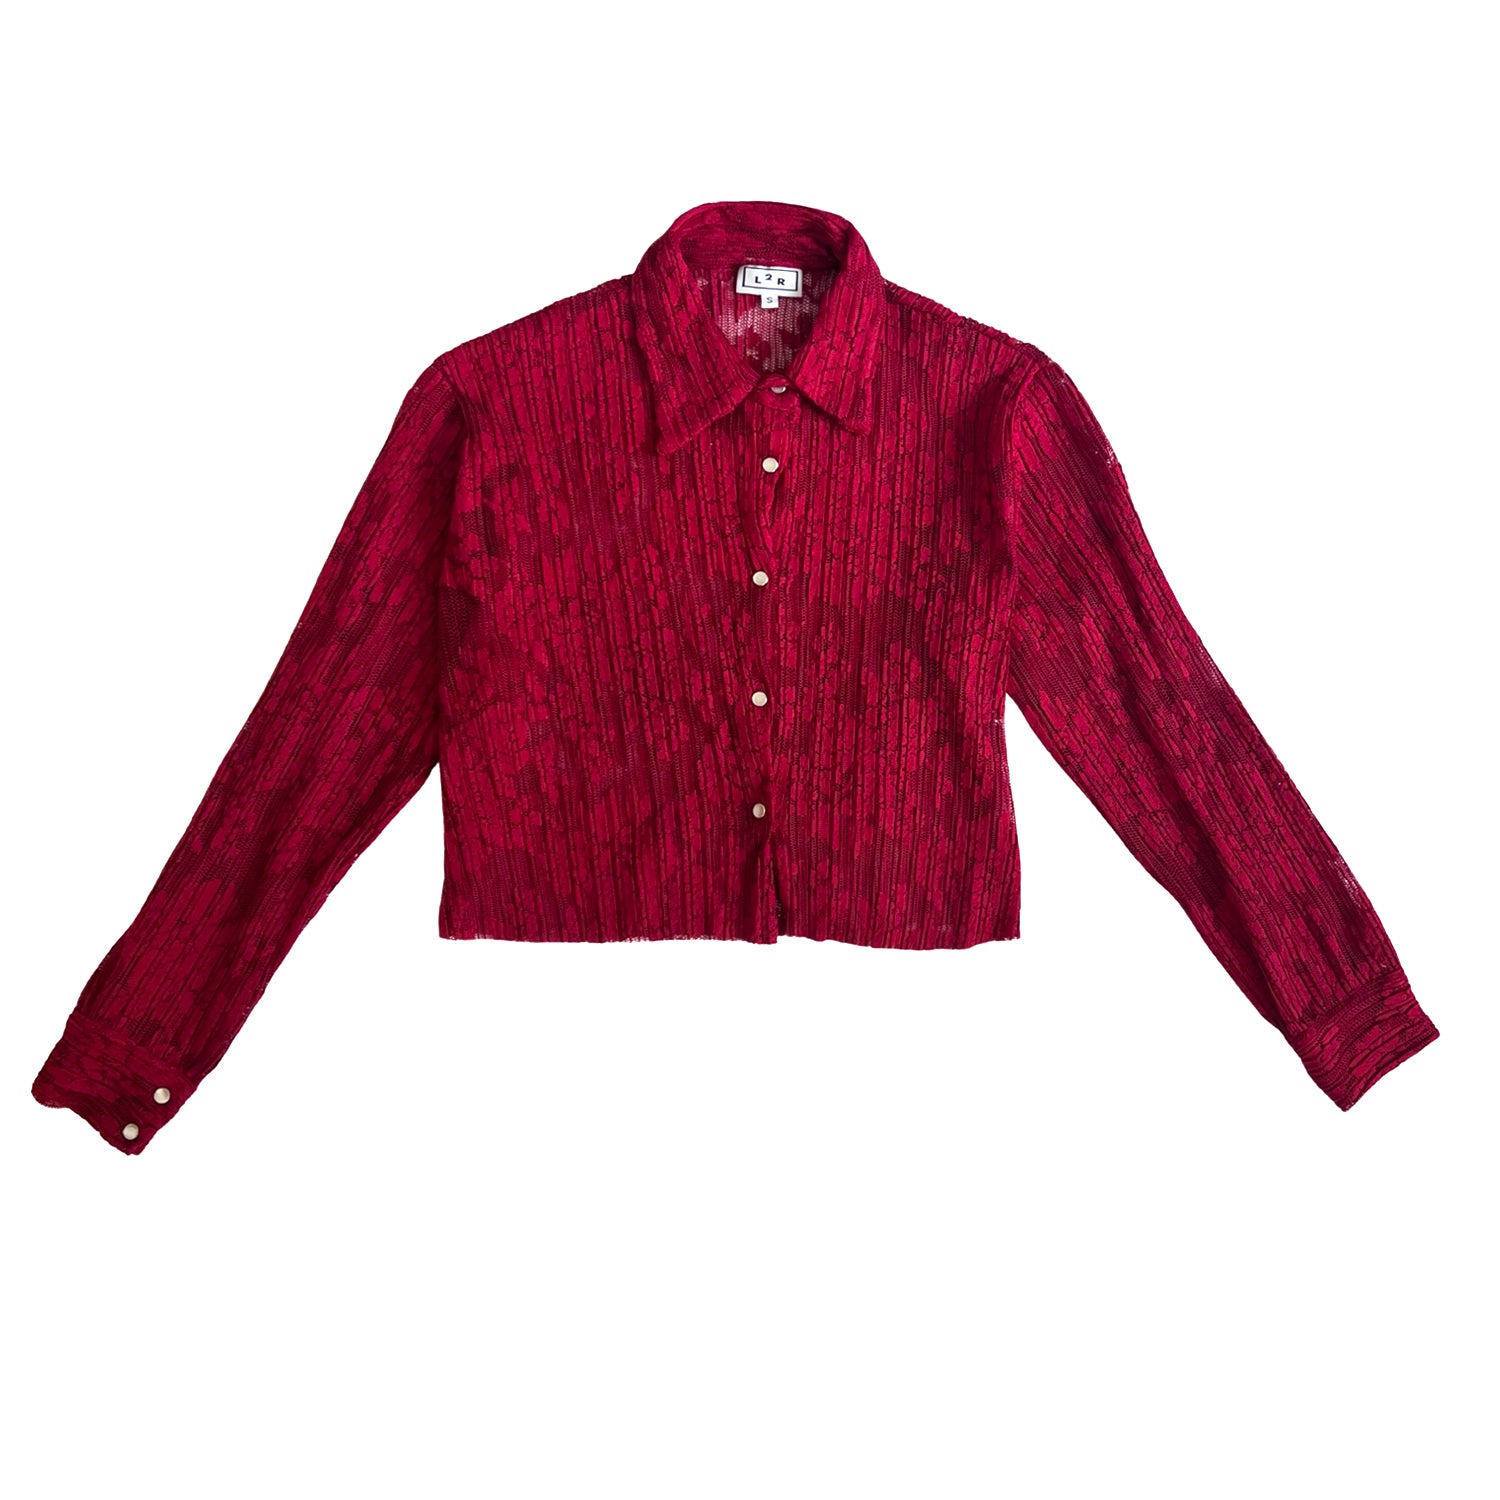 L2r The Label Women's Pink / Purple Cropped Pleated Shirt In Red Lace In Pink/purple